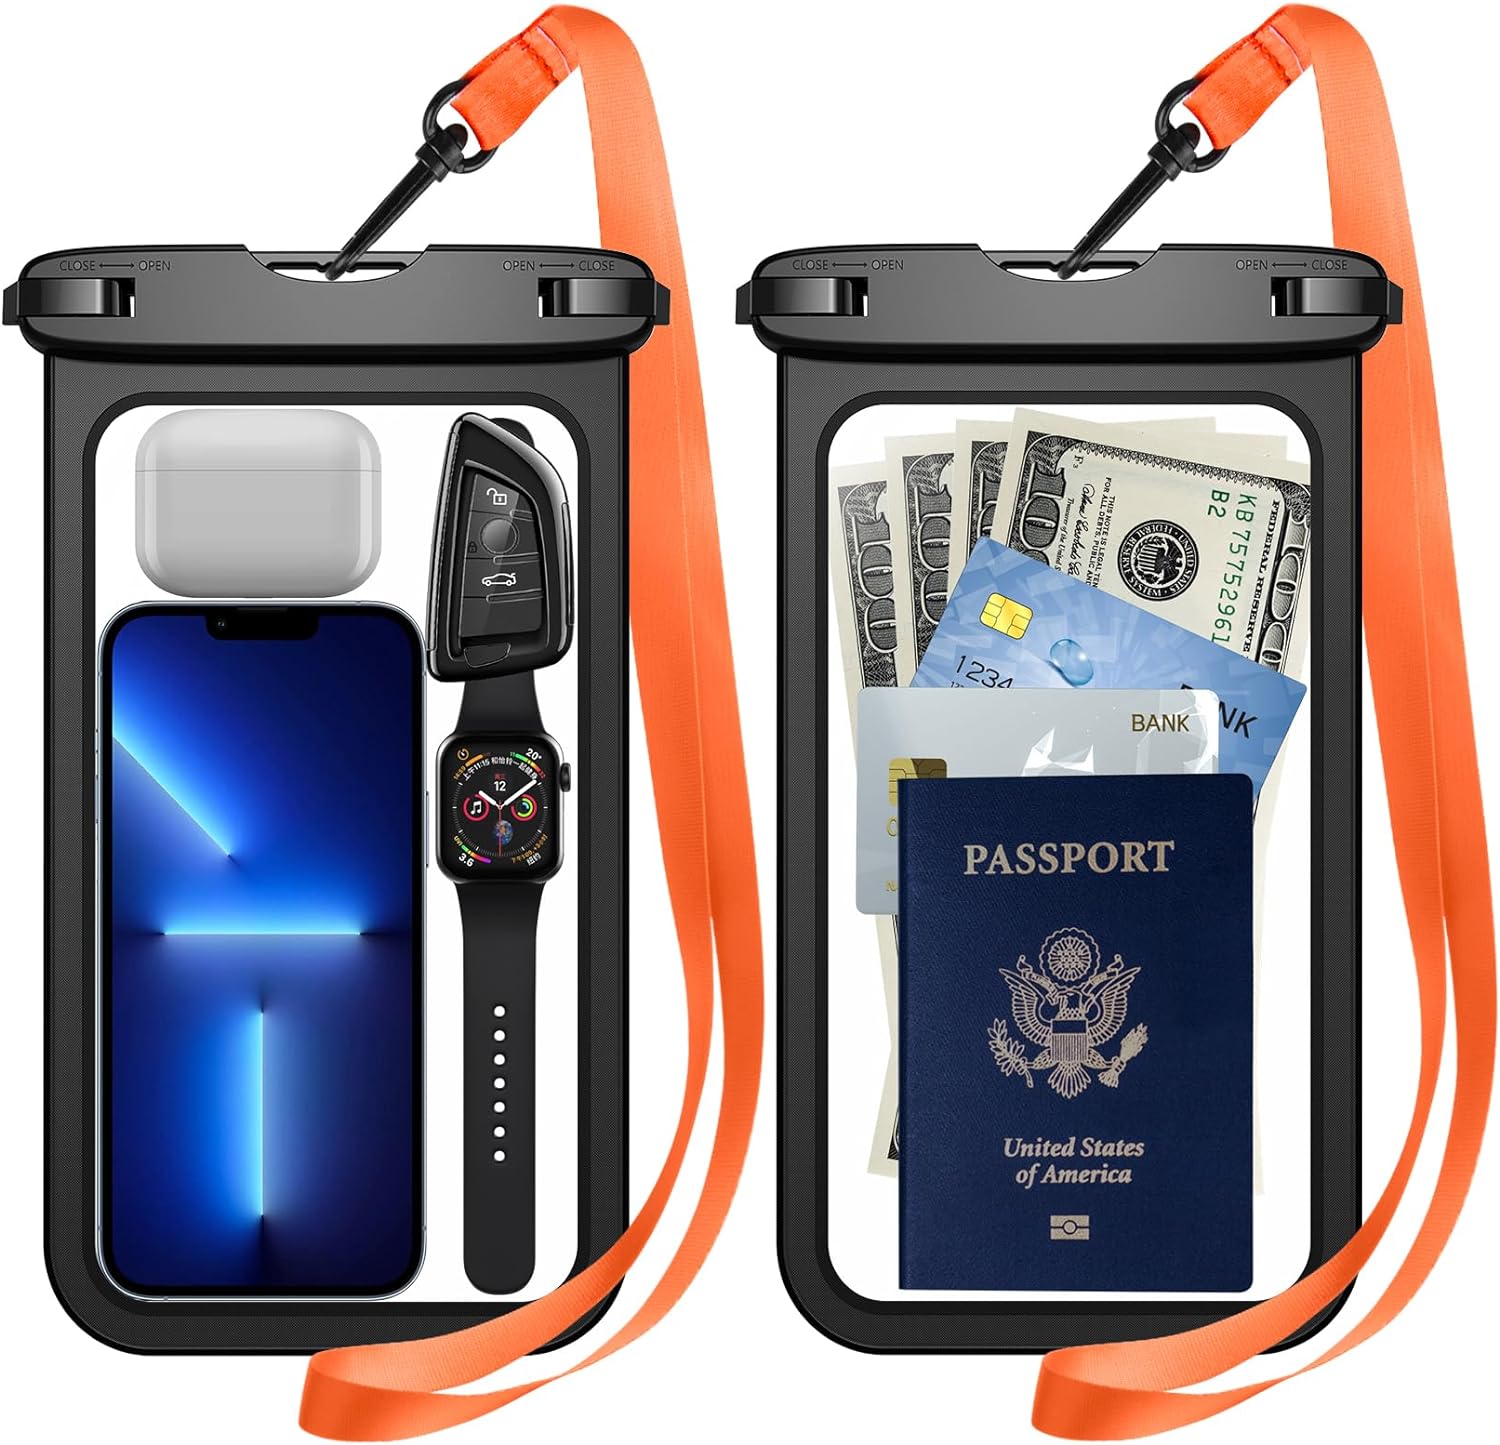 Waterproof mobile phone bag is a mobile phone protective case designed for water activities to prevent water damage to the mobile phone. Whether you're swimming, snorkeling, surfing or rafting, a waterproof phone bag gives you the peace of mind to have fun on the water.